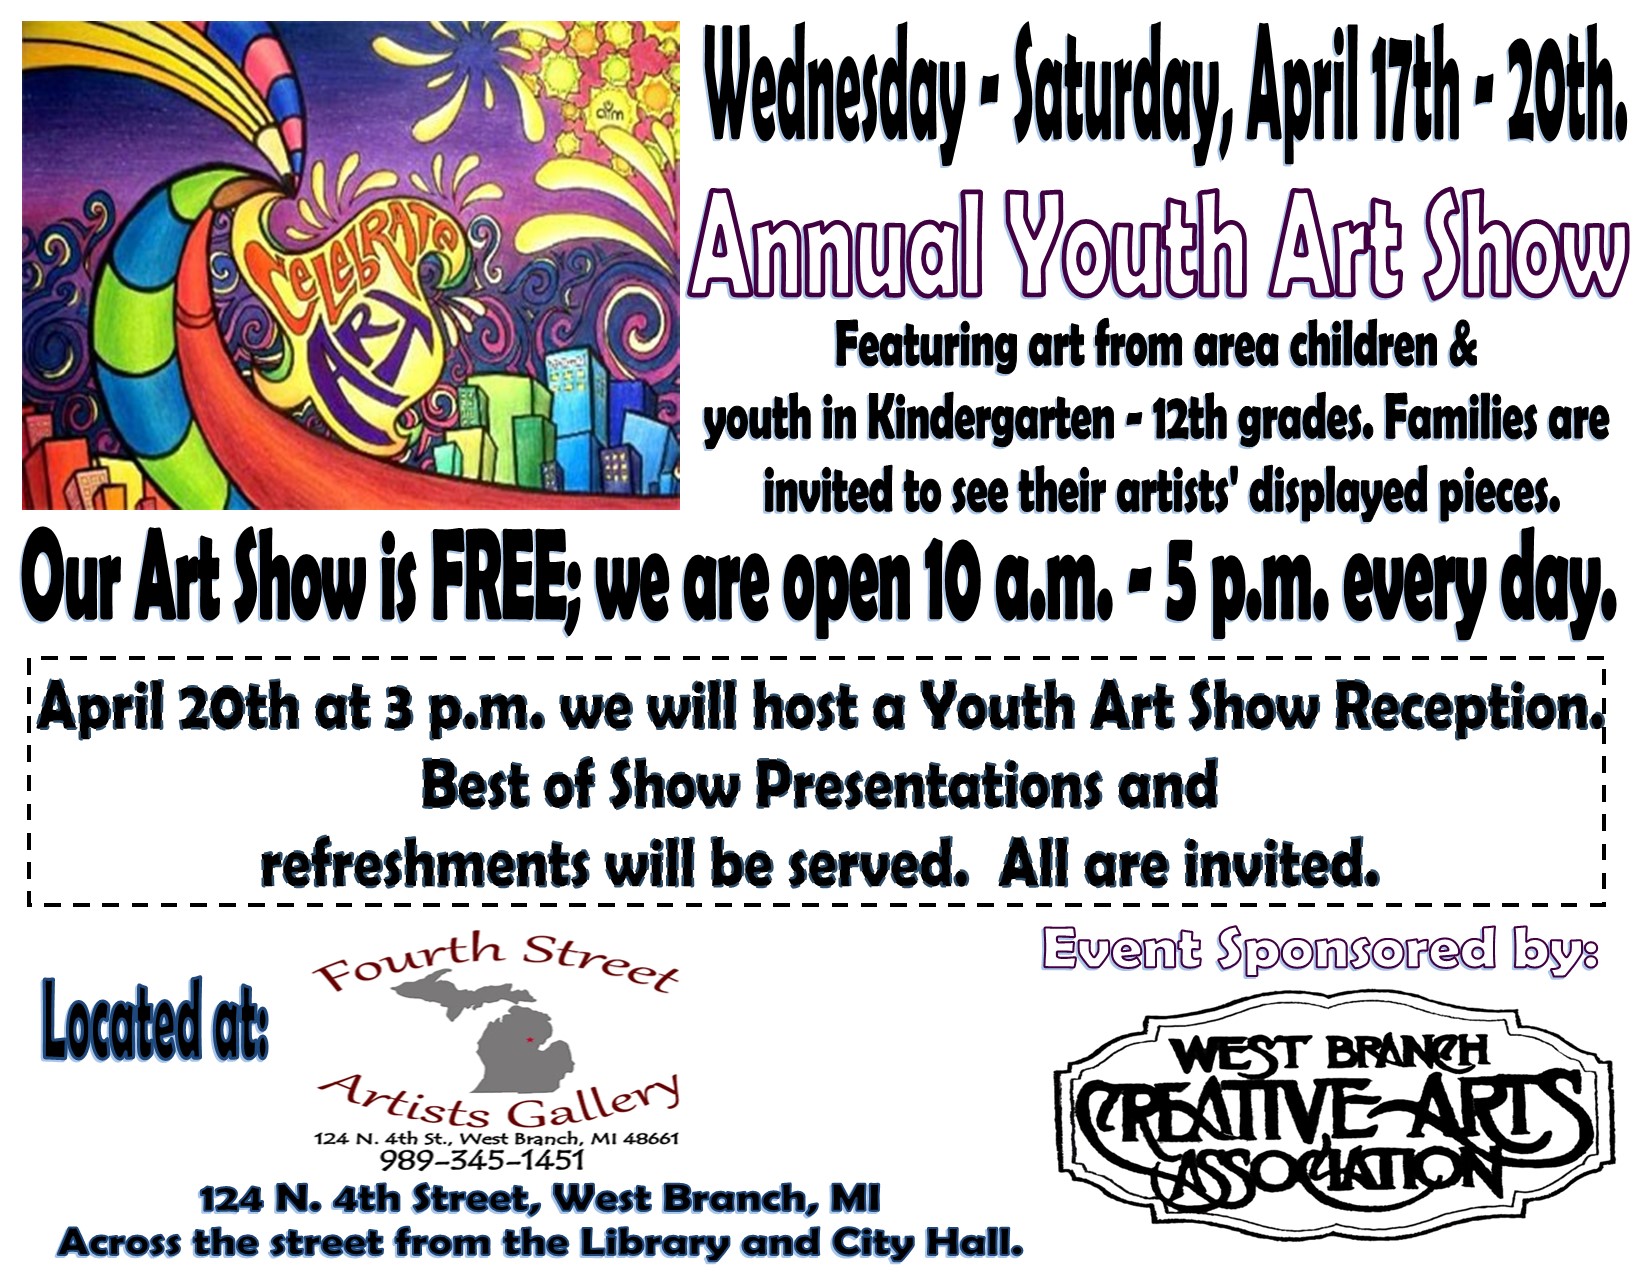 Wednesday - Saturday, April 17th - 20th. Annual Youth Art Show Featuring art from area children & youth in Kindergarten - 12th grades. Families are invited to see their artists' displayed pieces. Our art show is FREE; we are open 10 a.m. - 5 p.m. every day. April 20th at 3 p.m. we will host a Youth Art Show Reception. Best of Show Presentations and refreshments will be served. All are invited. Located at: Fourth Street Artists Gallery 124 N. 4th St., West Branch, MI 48661, 989-345-1451, Event Sponsored by: West Branch Creative Arts Association